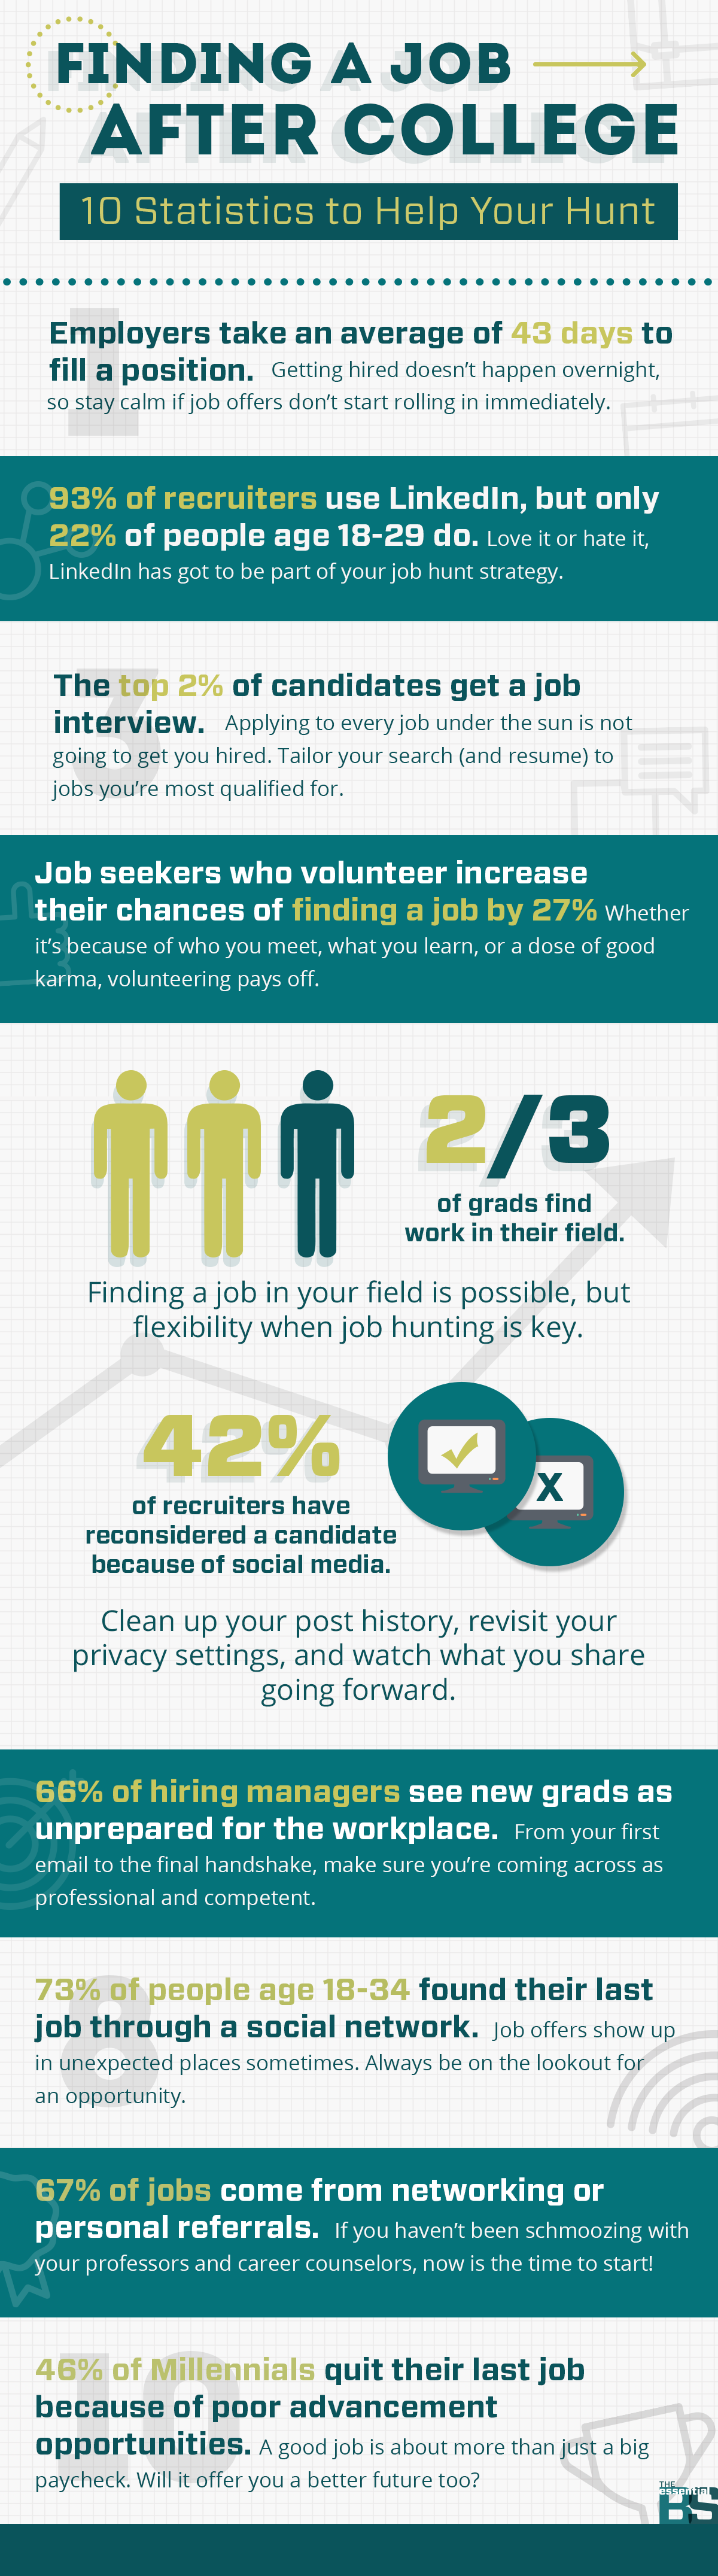 finding a job after college infographic